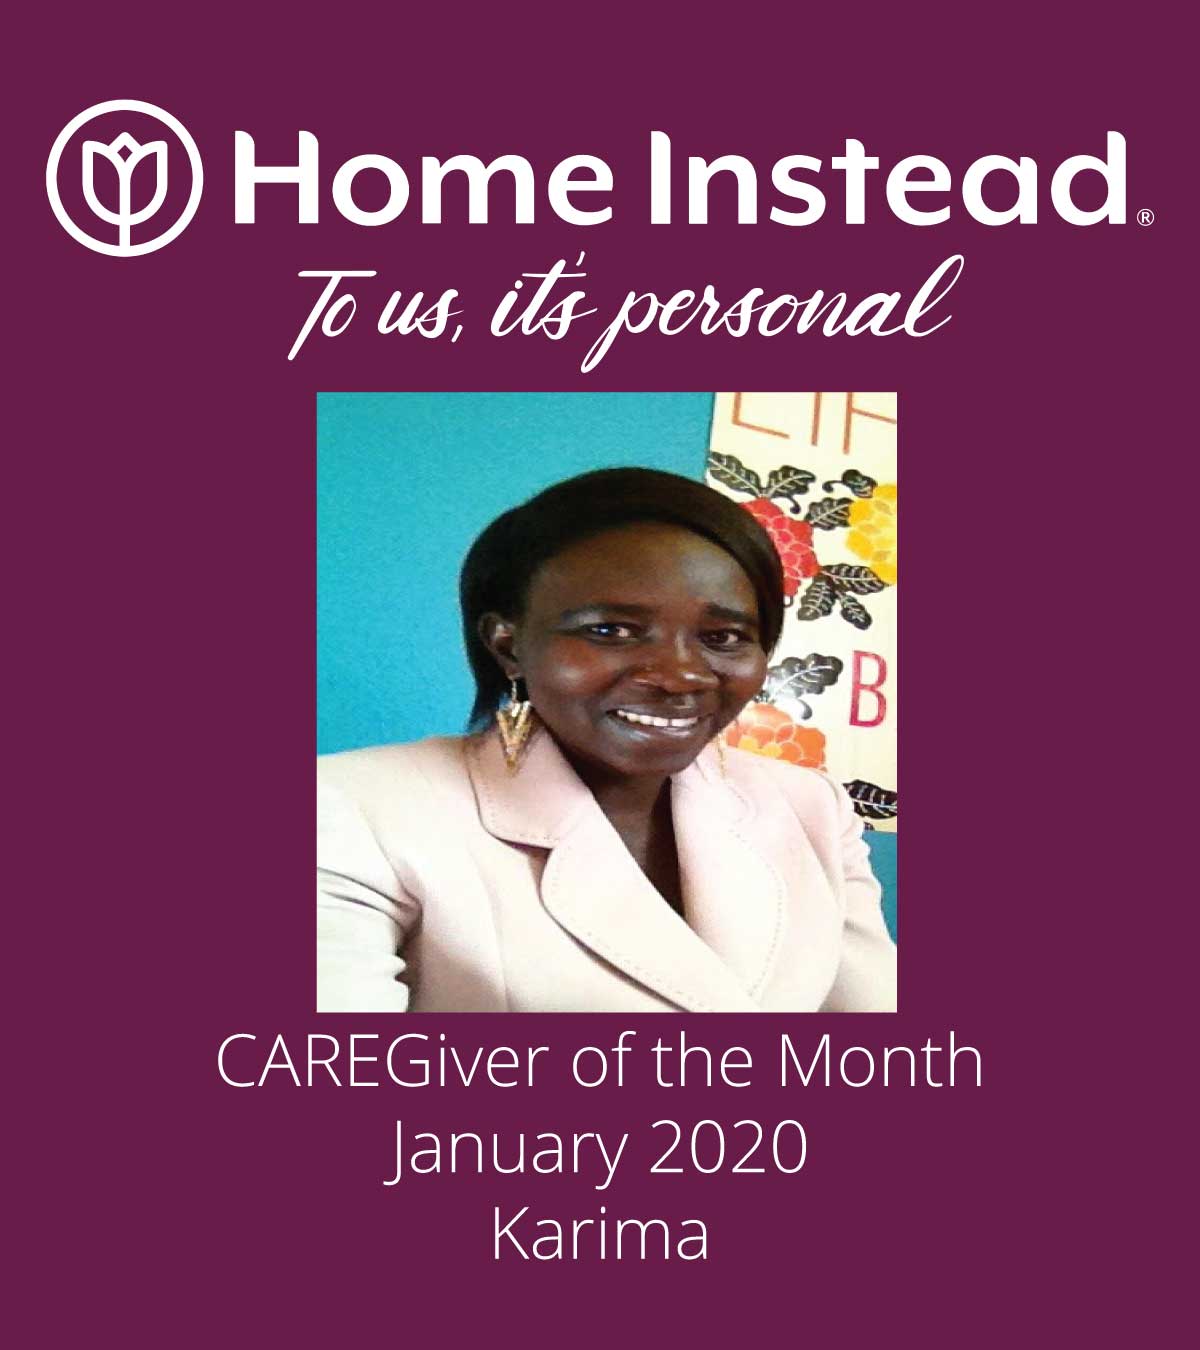 Home Instead Caregiver of the Month Karima